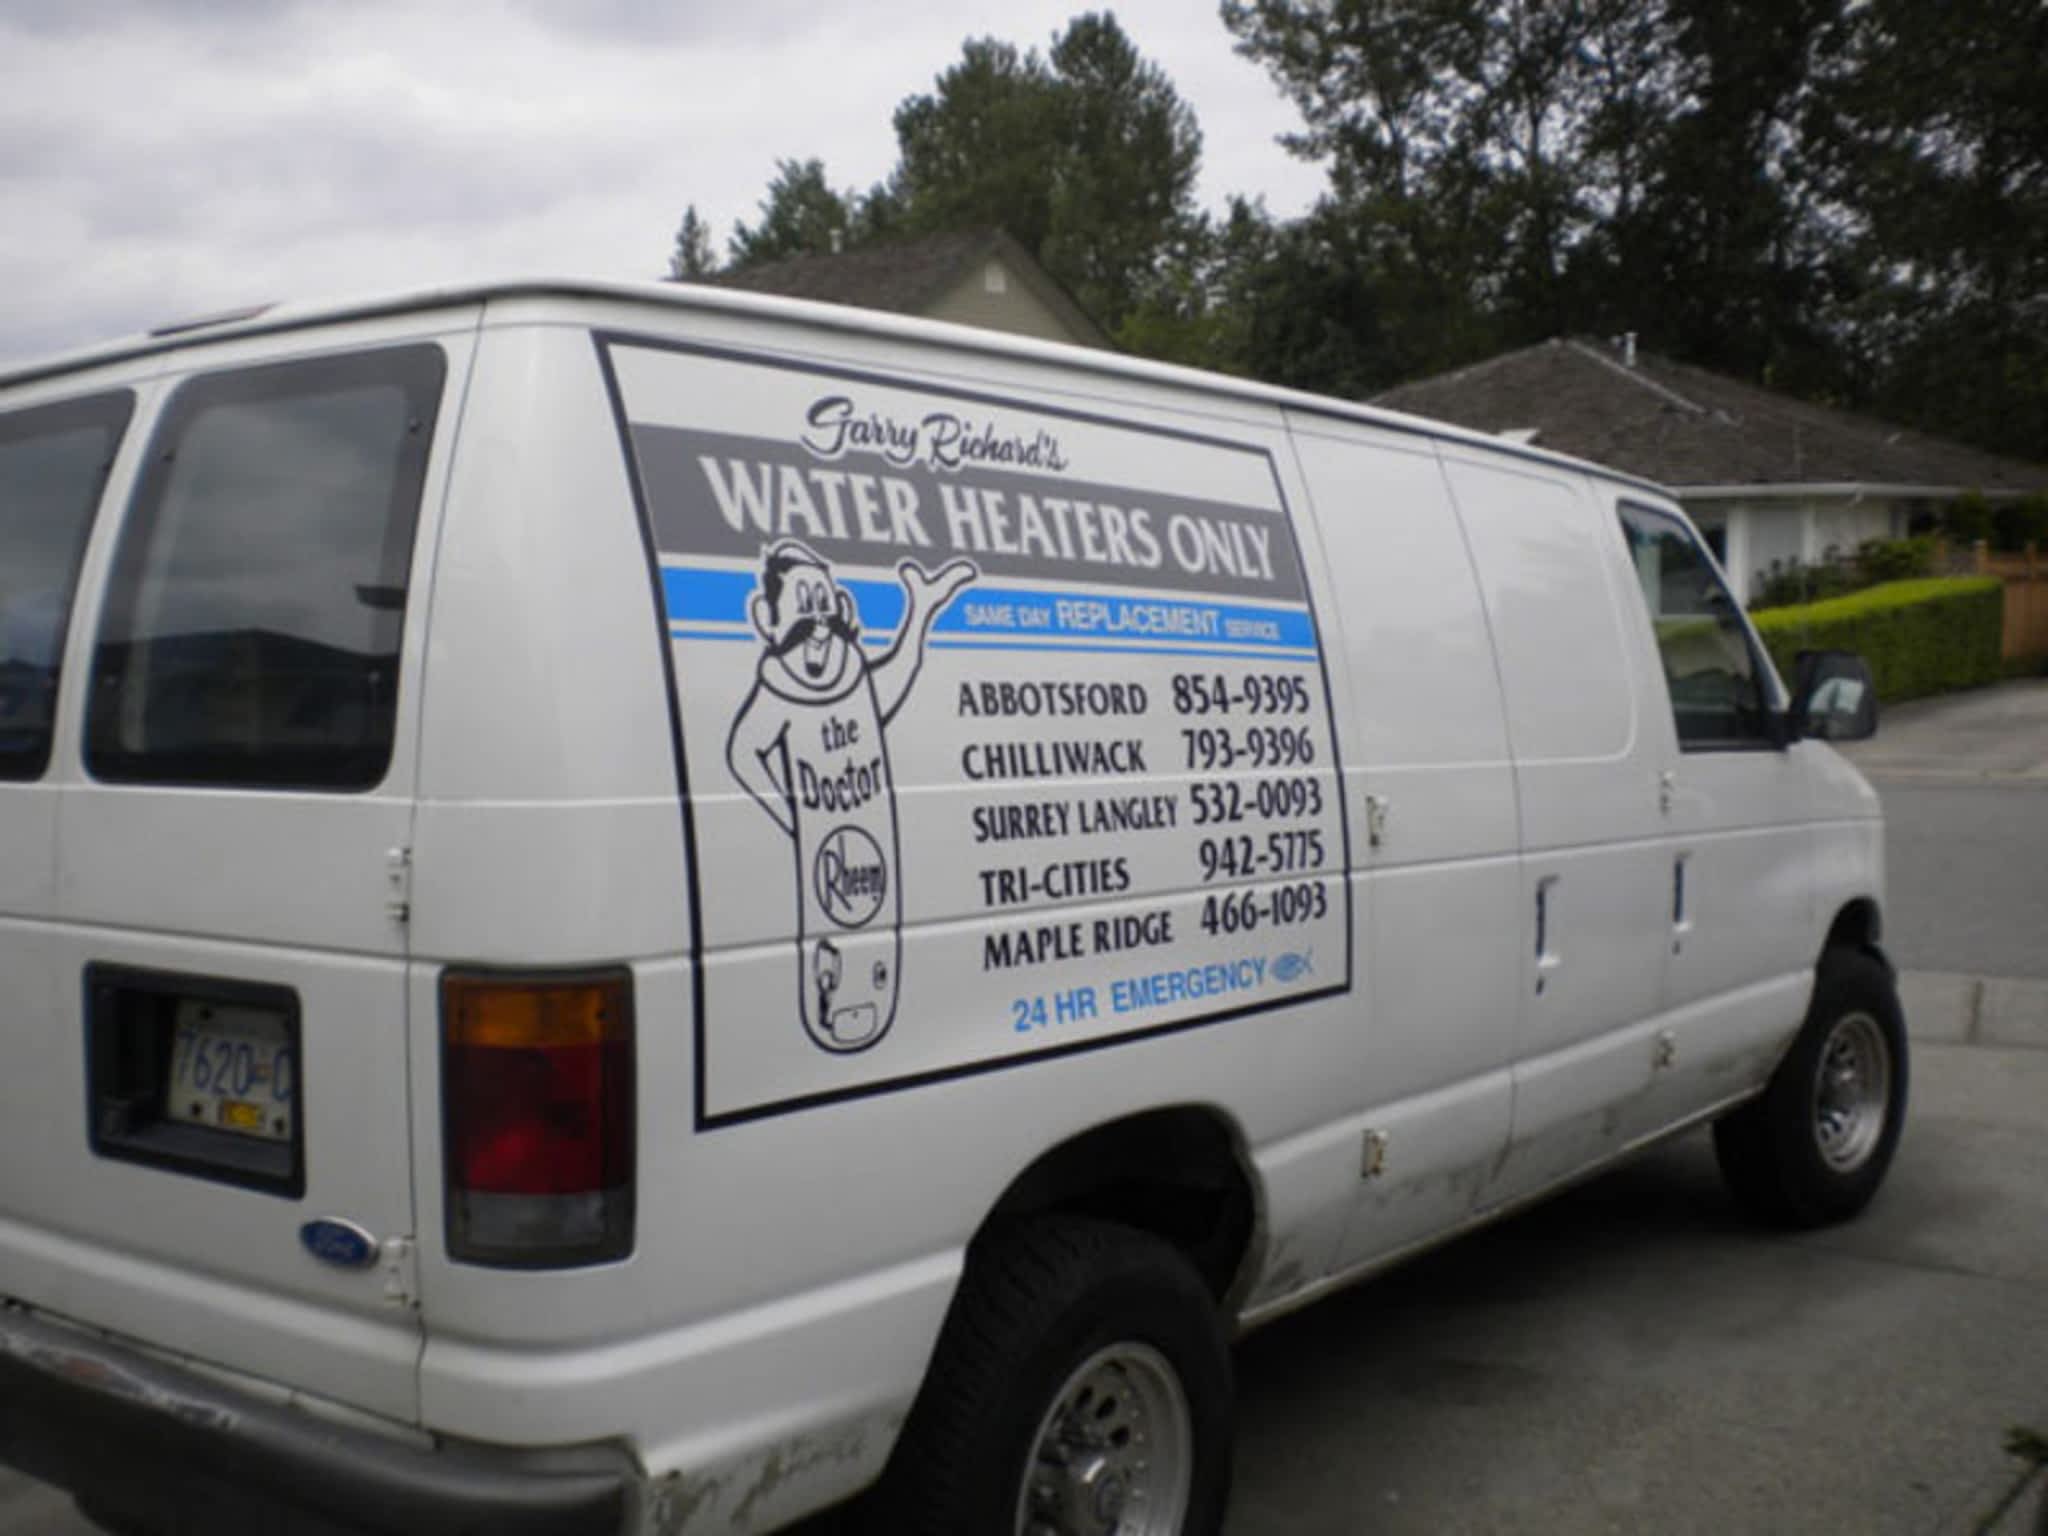 photo Garry Richard's Water Heaters Only